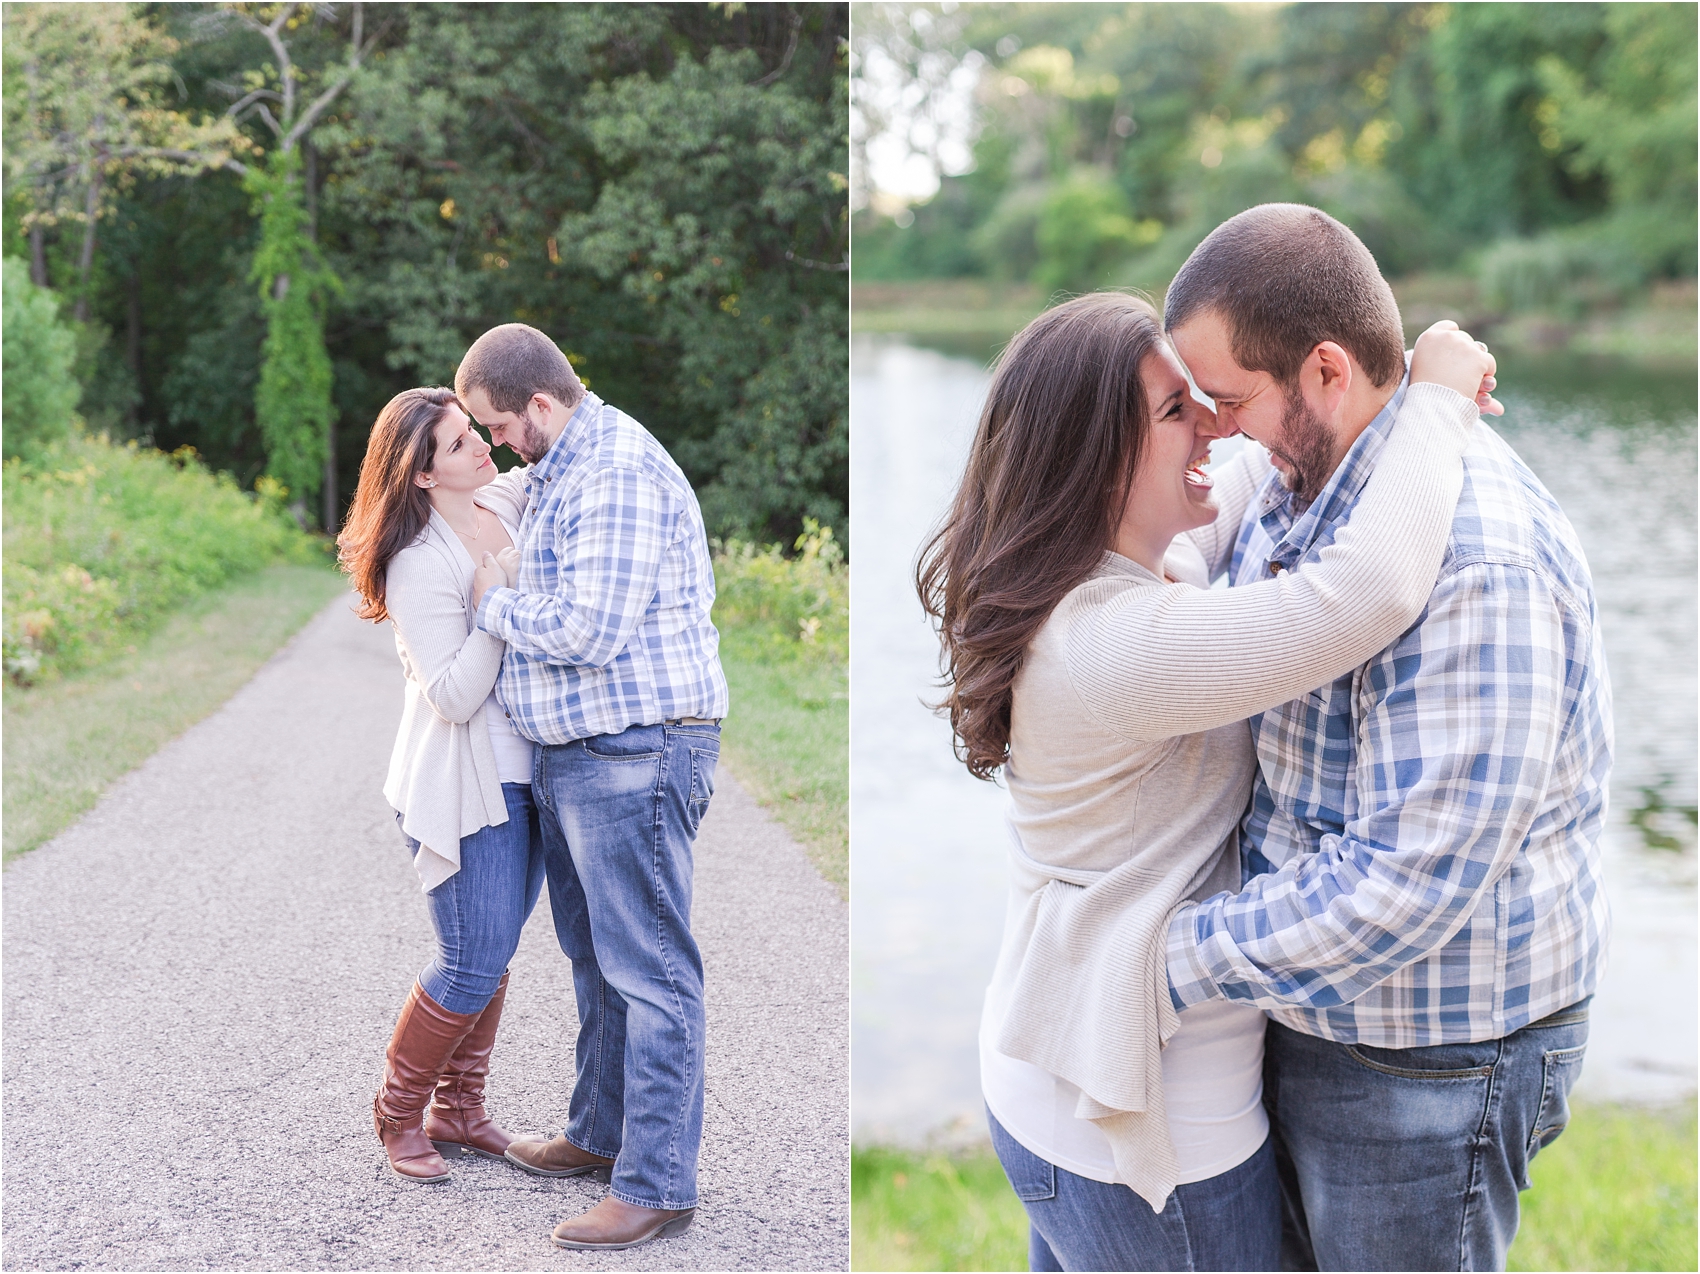 candid-romantic-summer-engagement-photos-at-hidden-lake-gardens-and-black-fire-winery-in-tipton-mi-by-courtney-carolyn-photography_0026.jpg